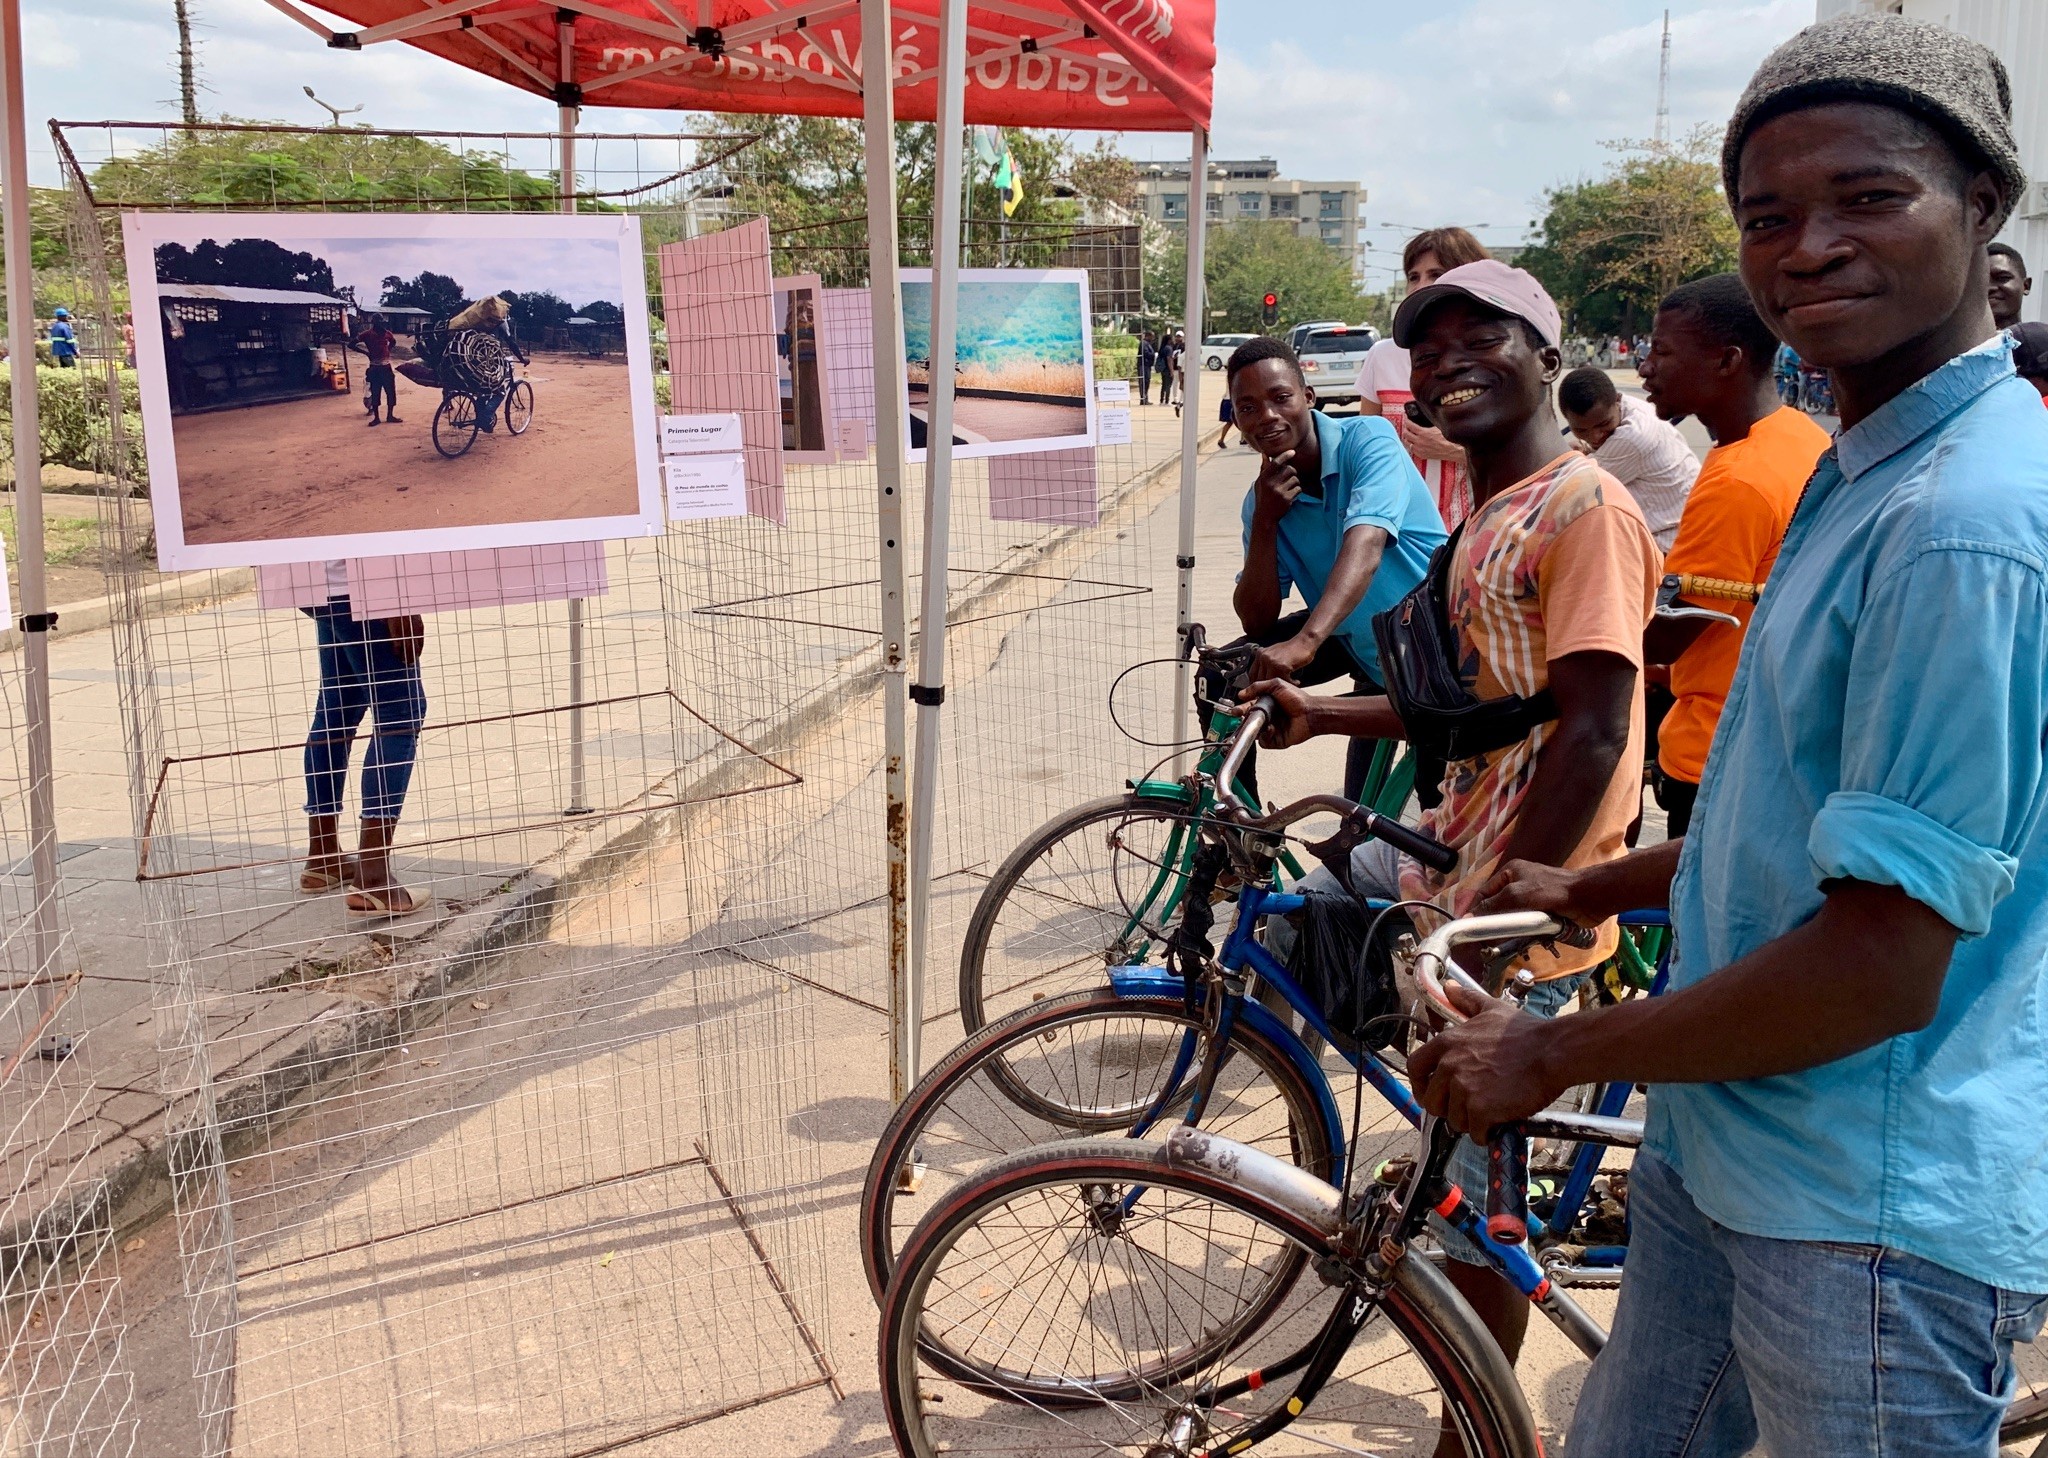 Cyclists posing while appreciating the road safety and active mobility photo exhibition at Quelimane’s Culture and Handcraft Fair. 